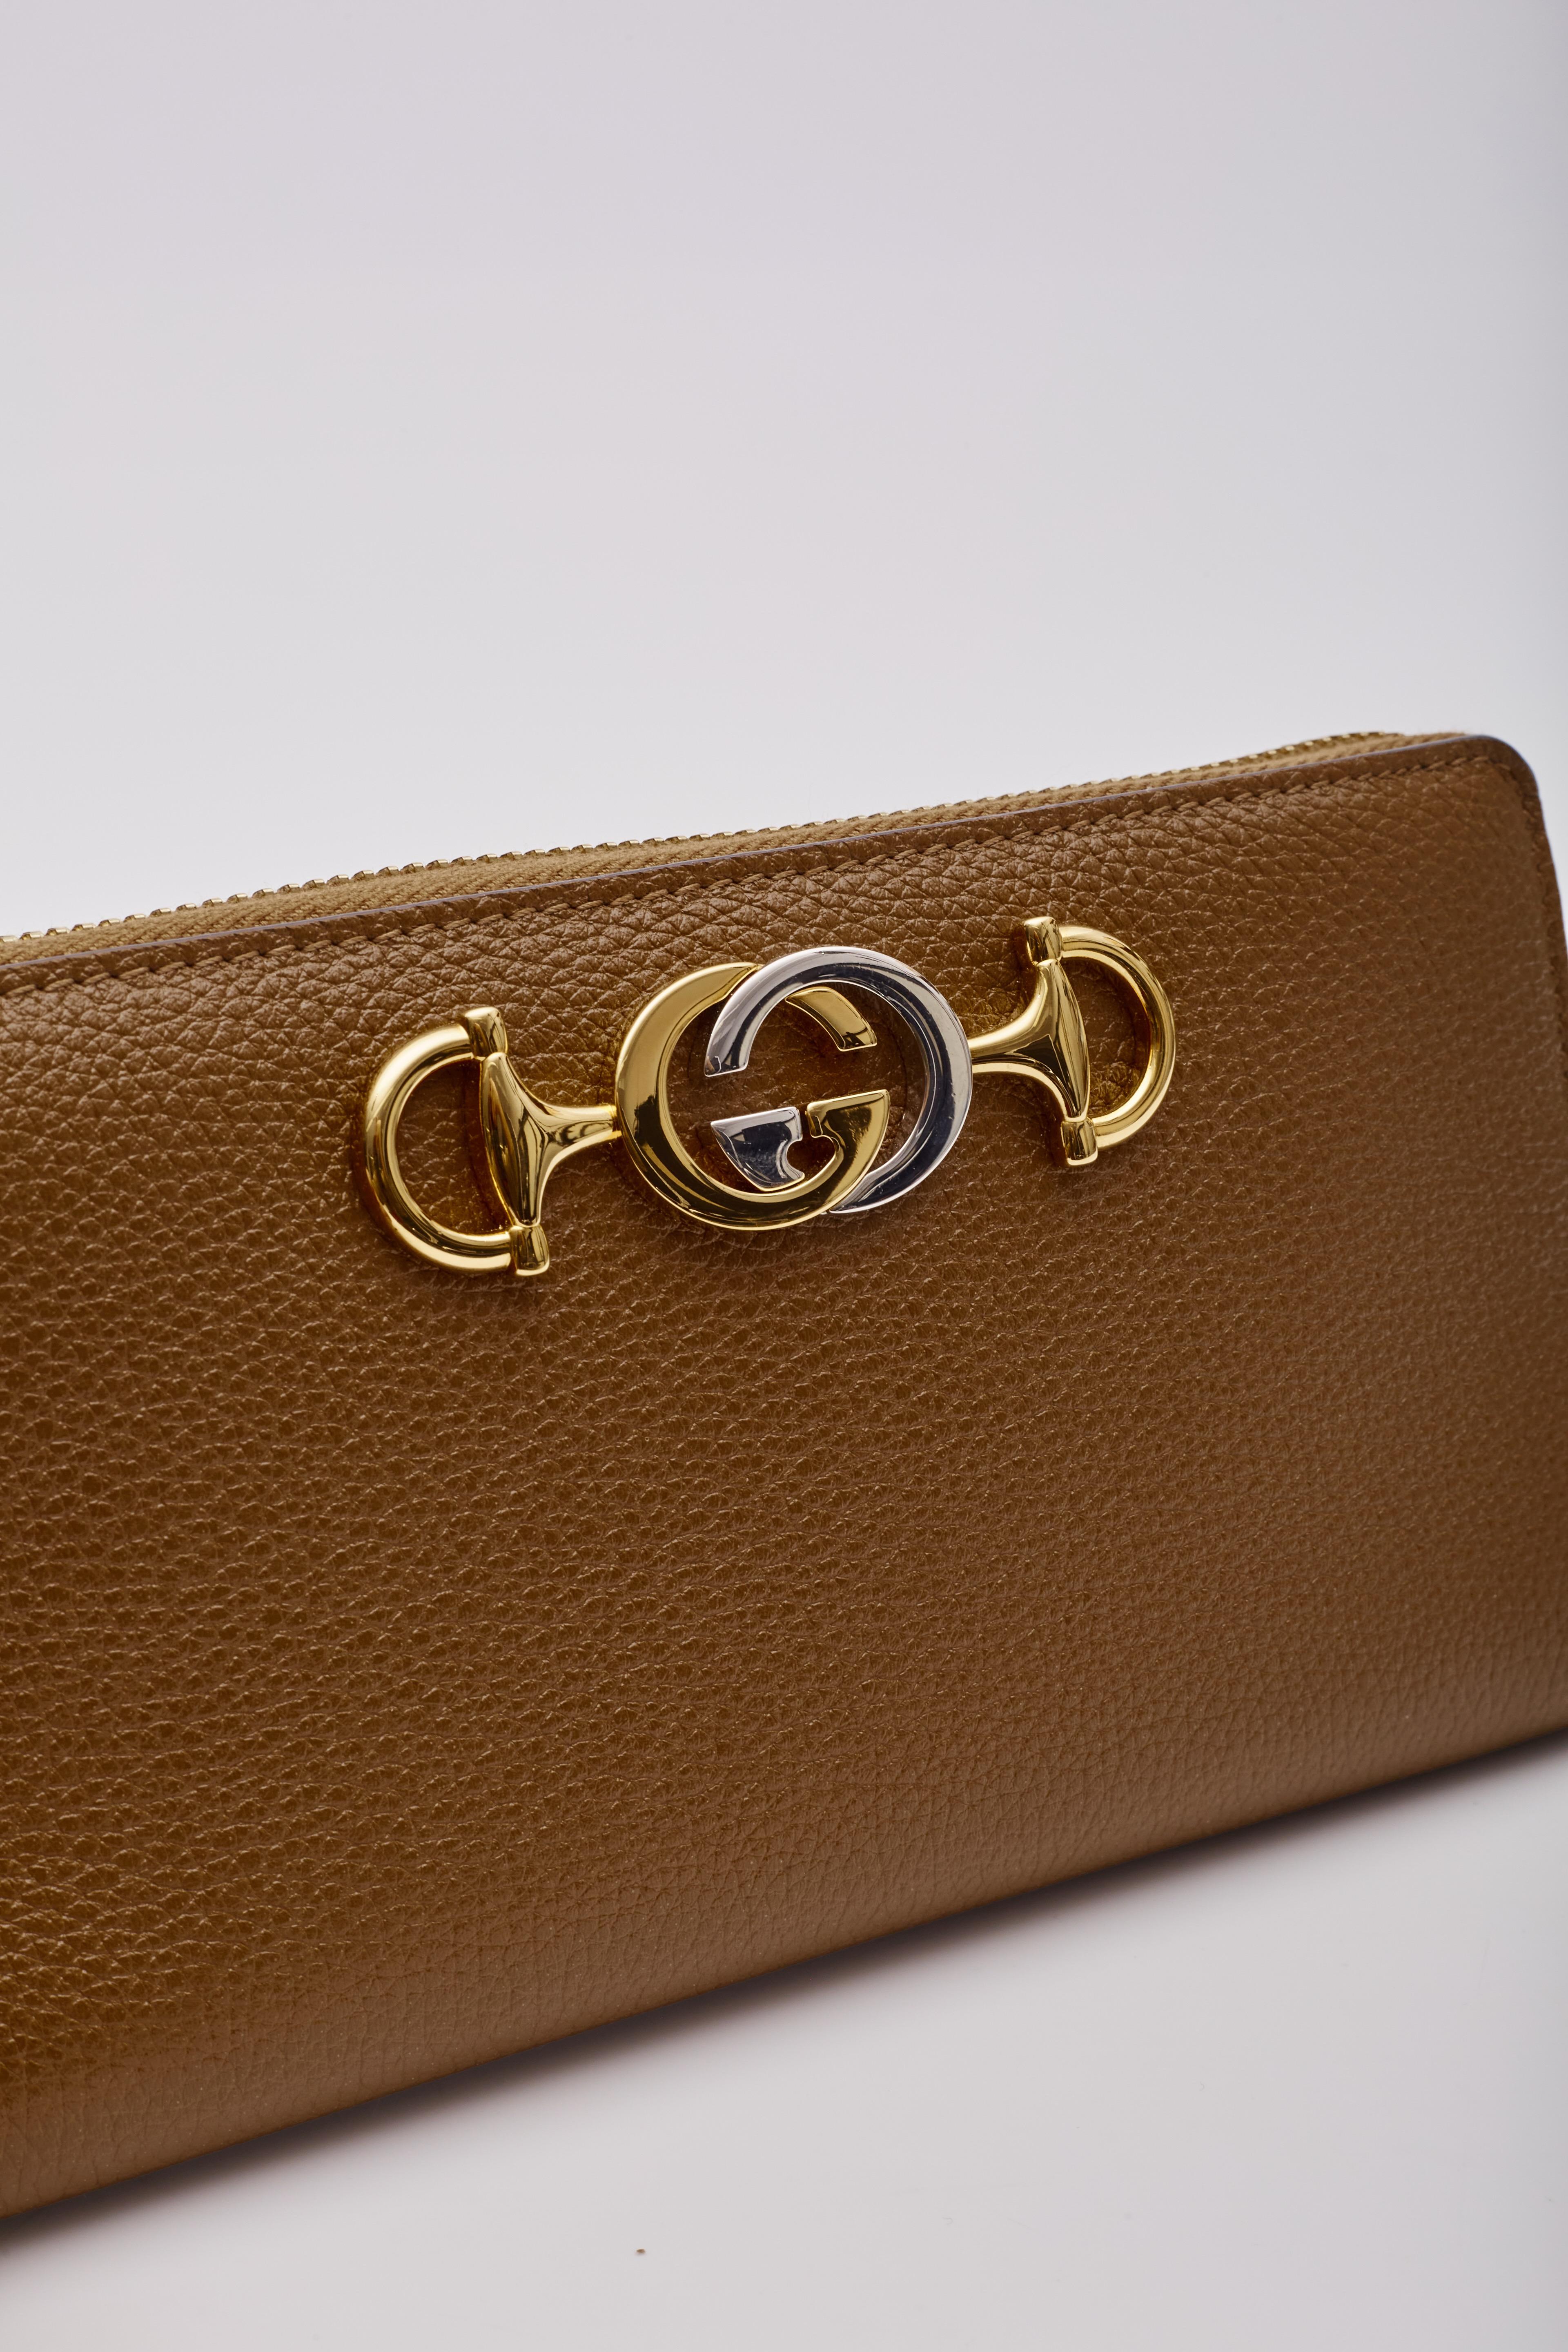 Gucci Caramel Leather Zumi Zip Around Wallet For Sale 5